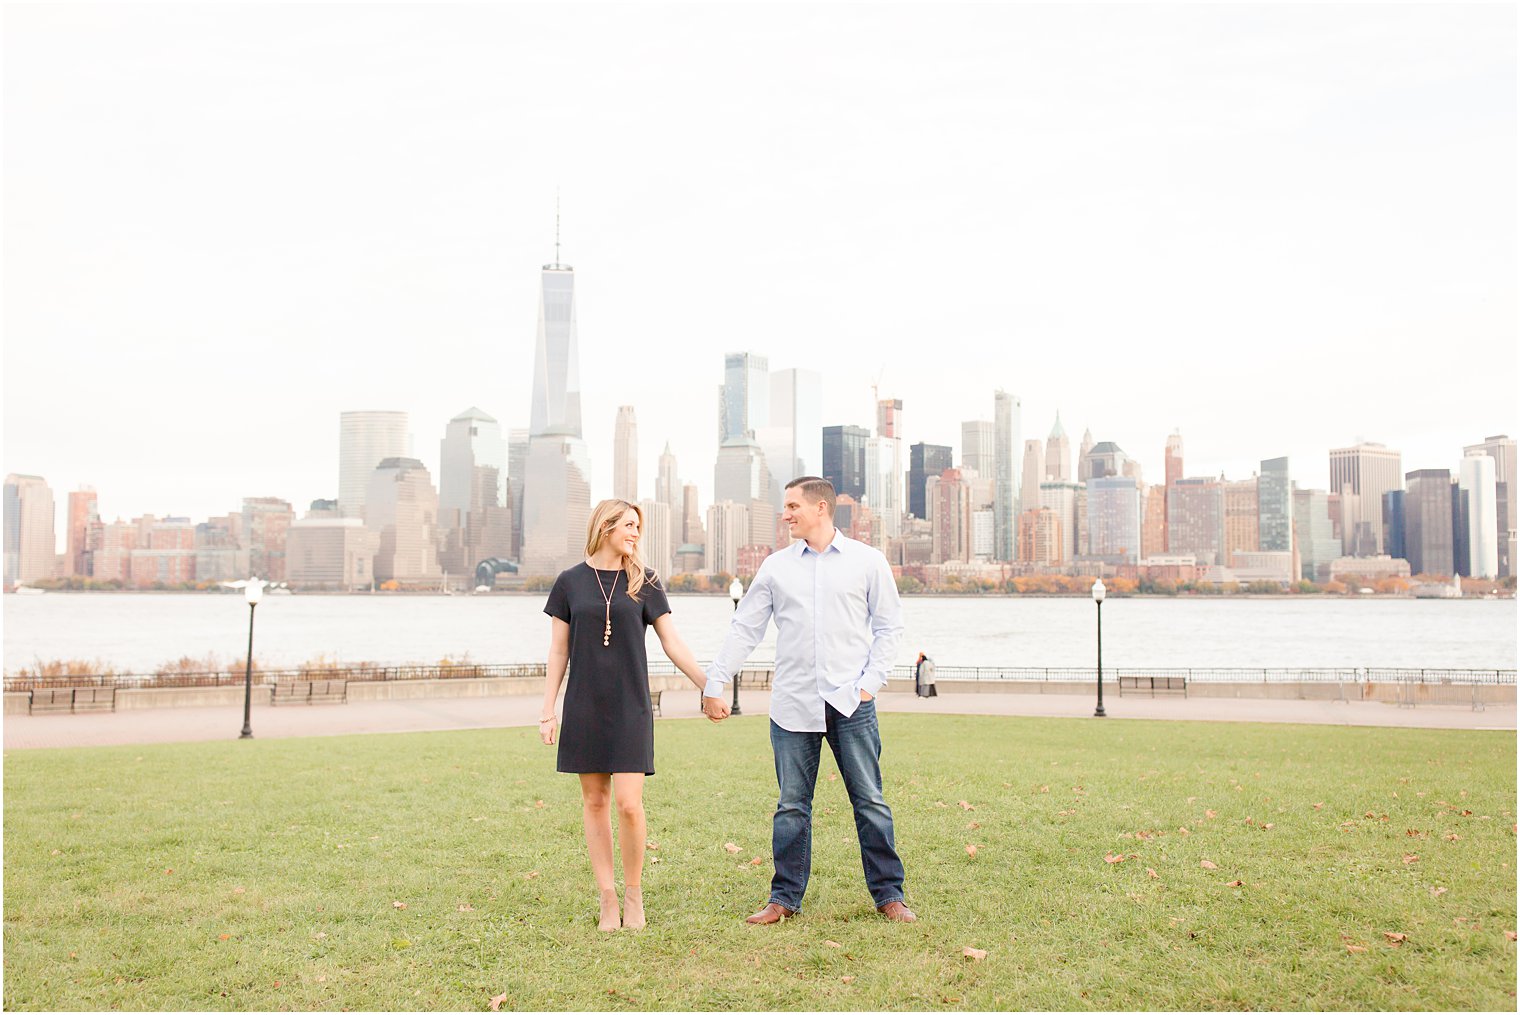 Engagement photos with NYC skyline